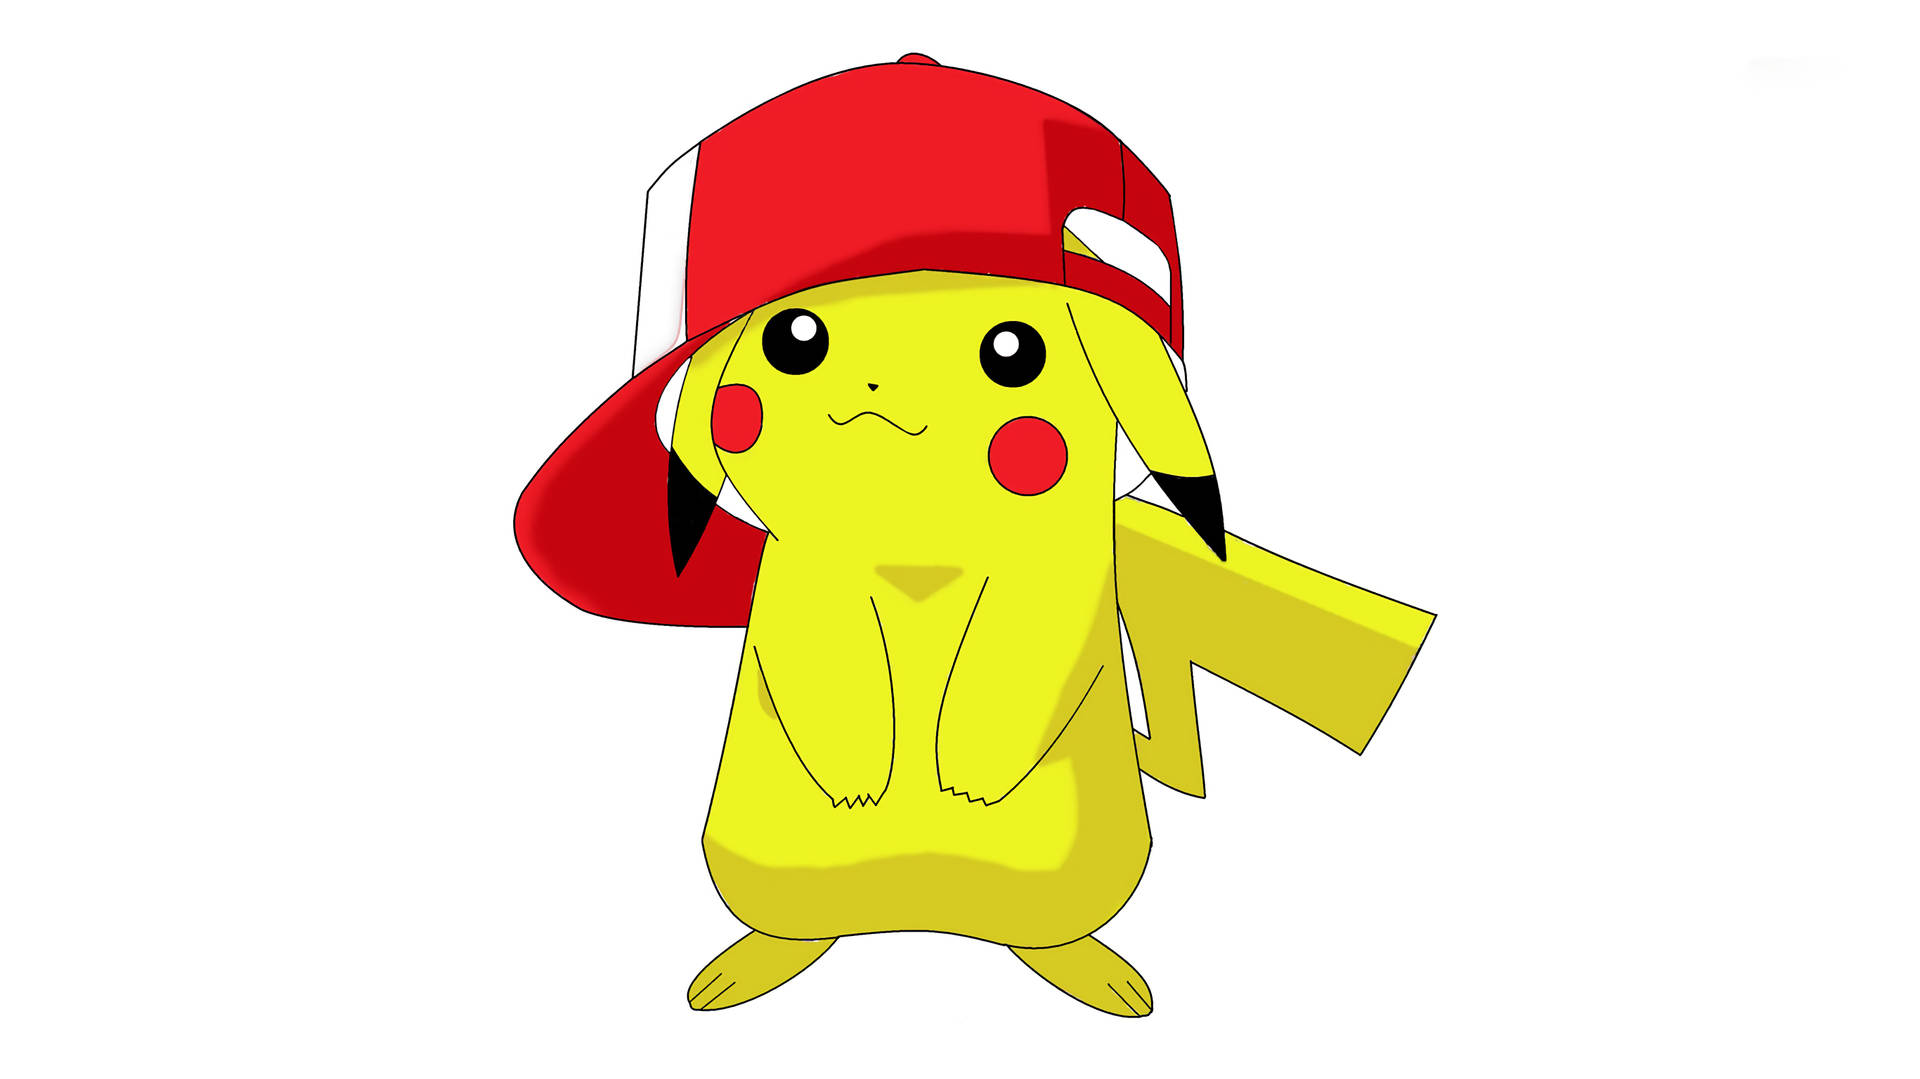 Cool Pokemon Pikachu With Red Hat Background